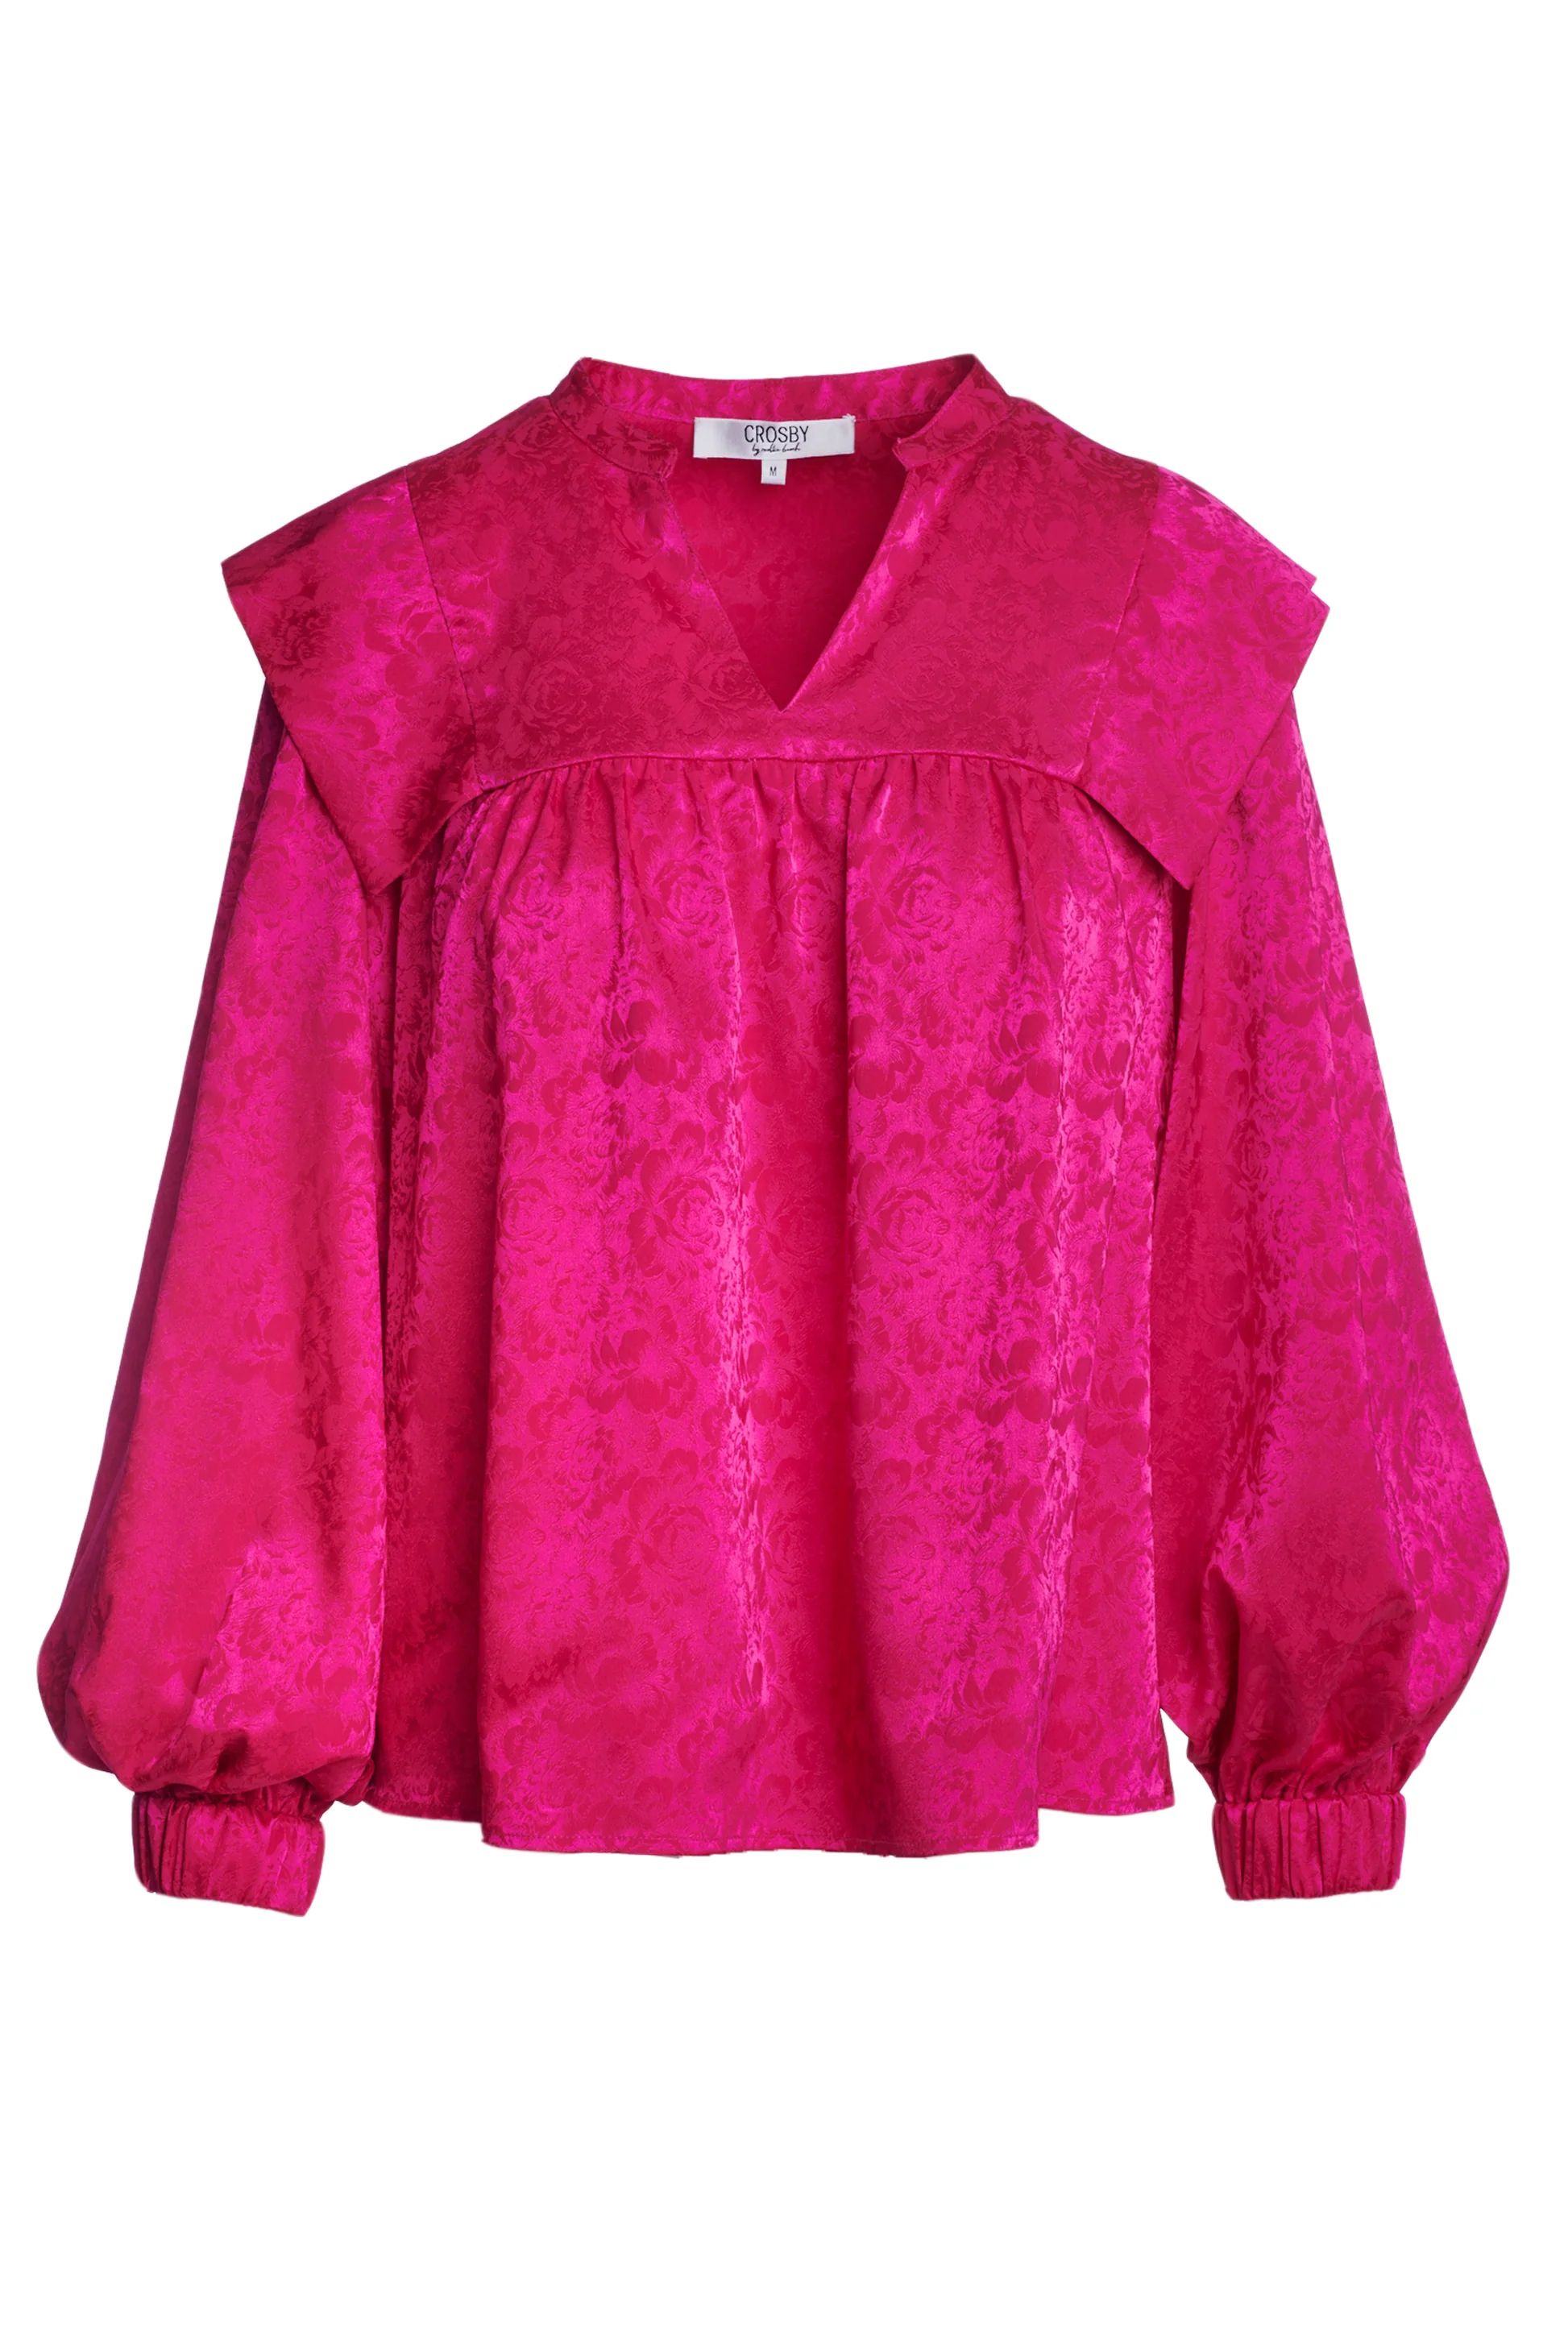 Gaines Top in Magenta Magic - CROSBY by Mollie Burch | CROSBY by Mollie Burch